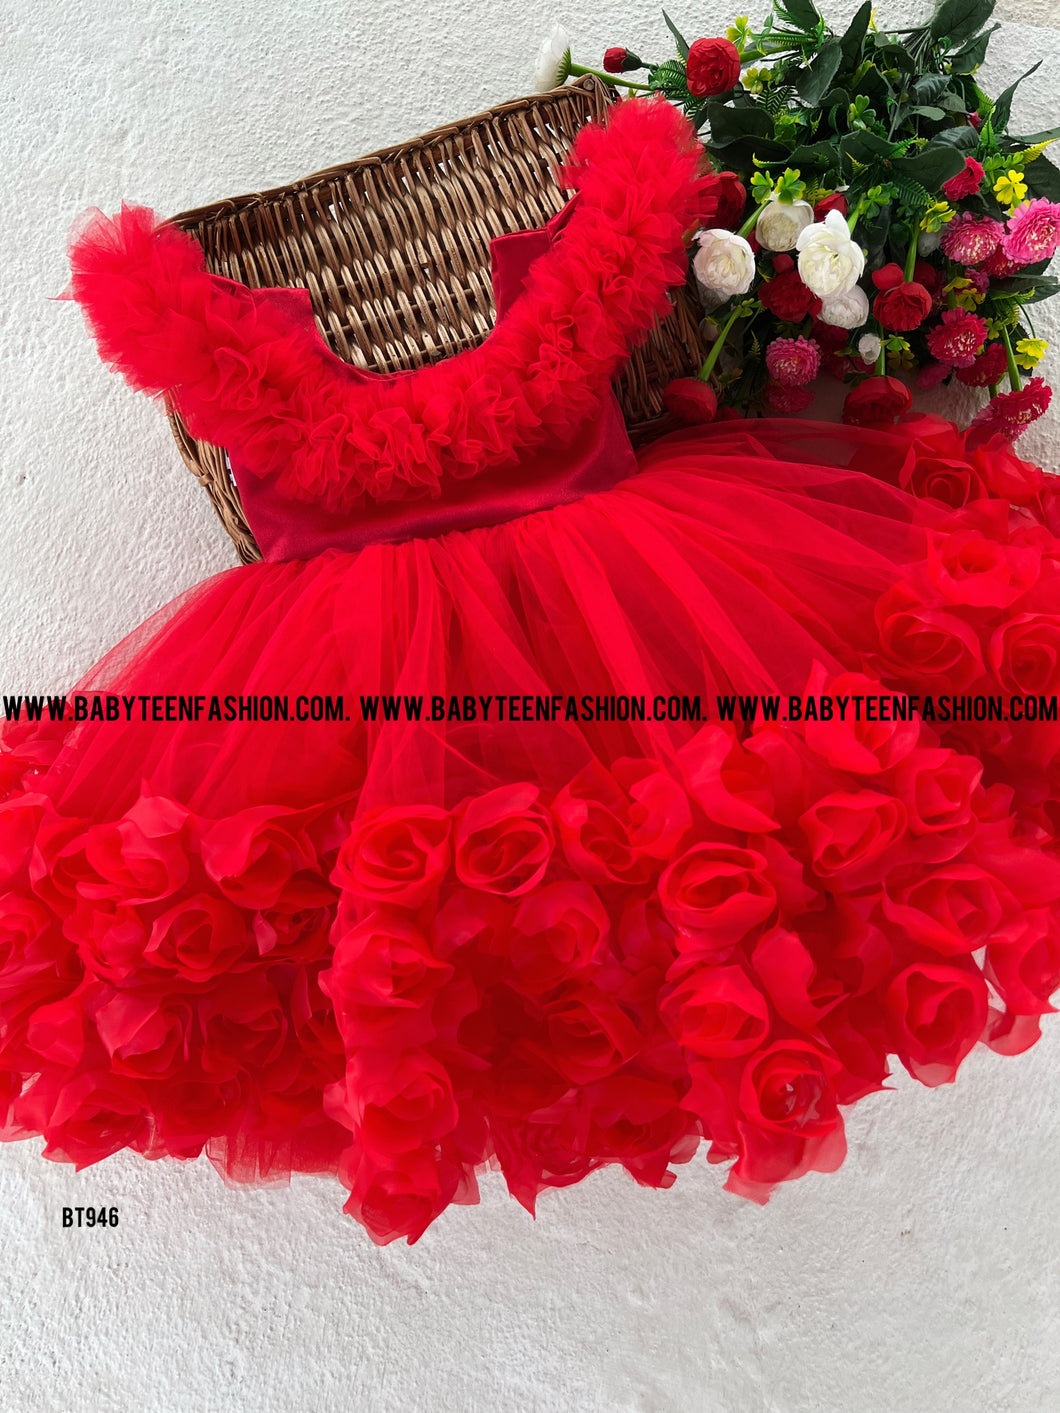 BT946 Ruby Blossom Tulle Party Dress